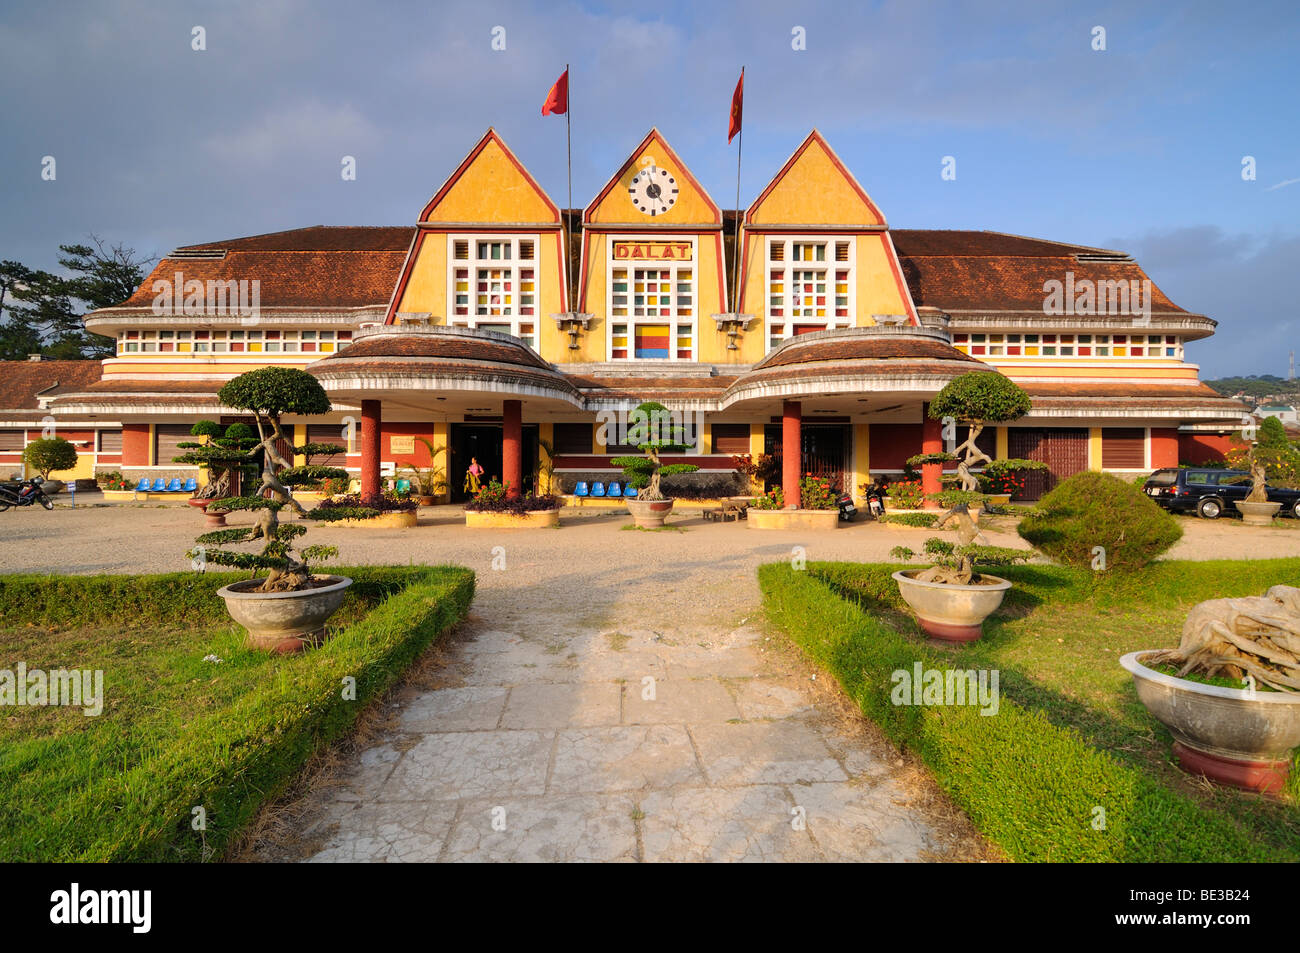 Building of the old railway station, Dalat, Central Highlands, Vietnam, Asia Stock Photo